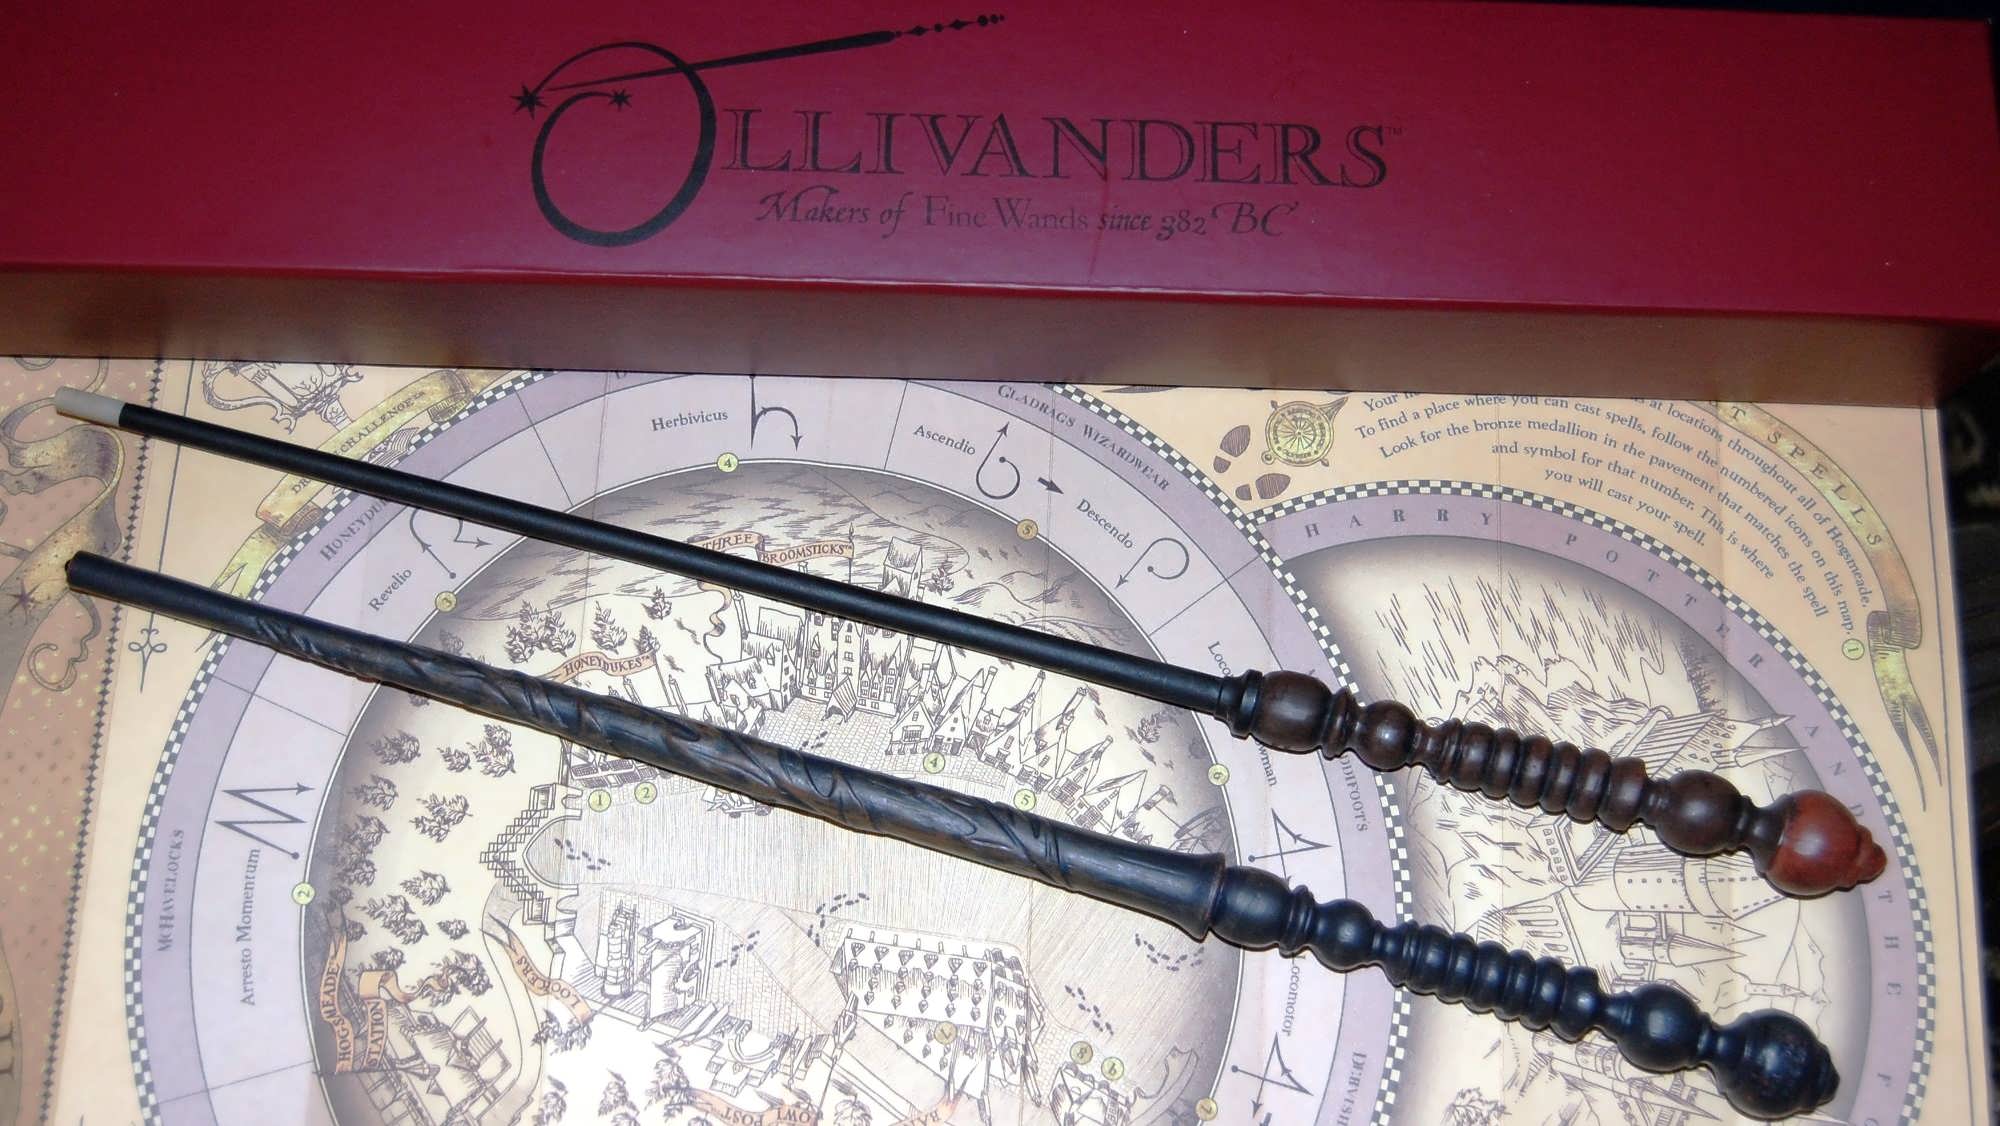 Comparing an original and an interactive wand